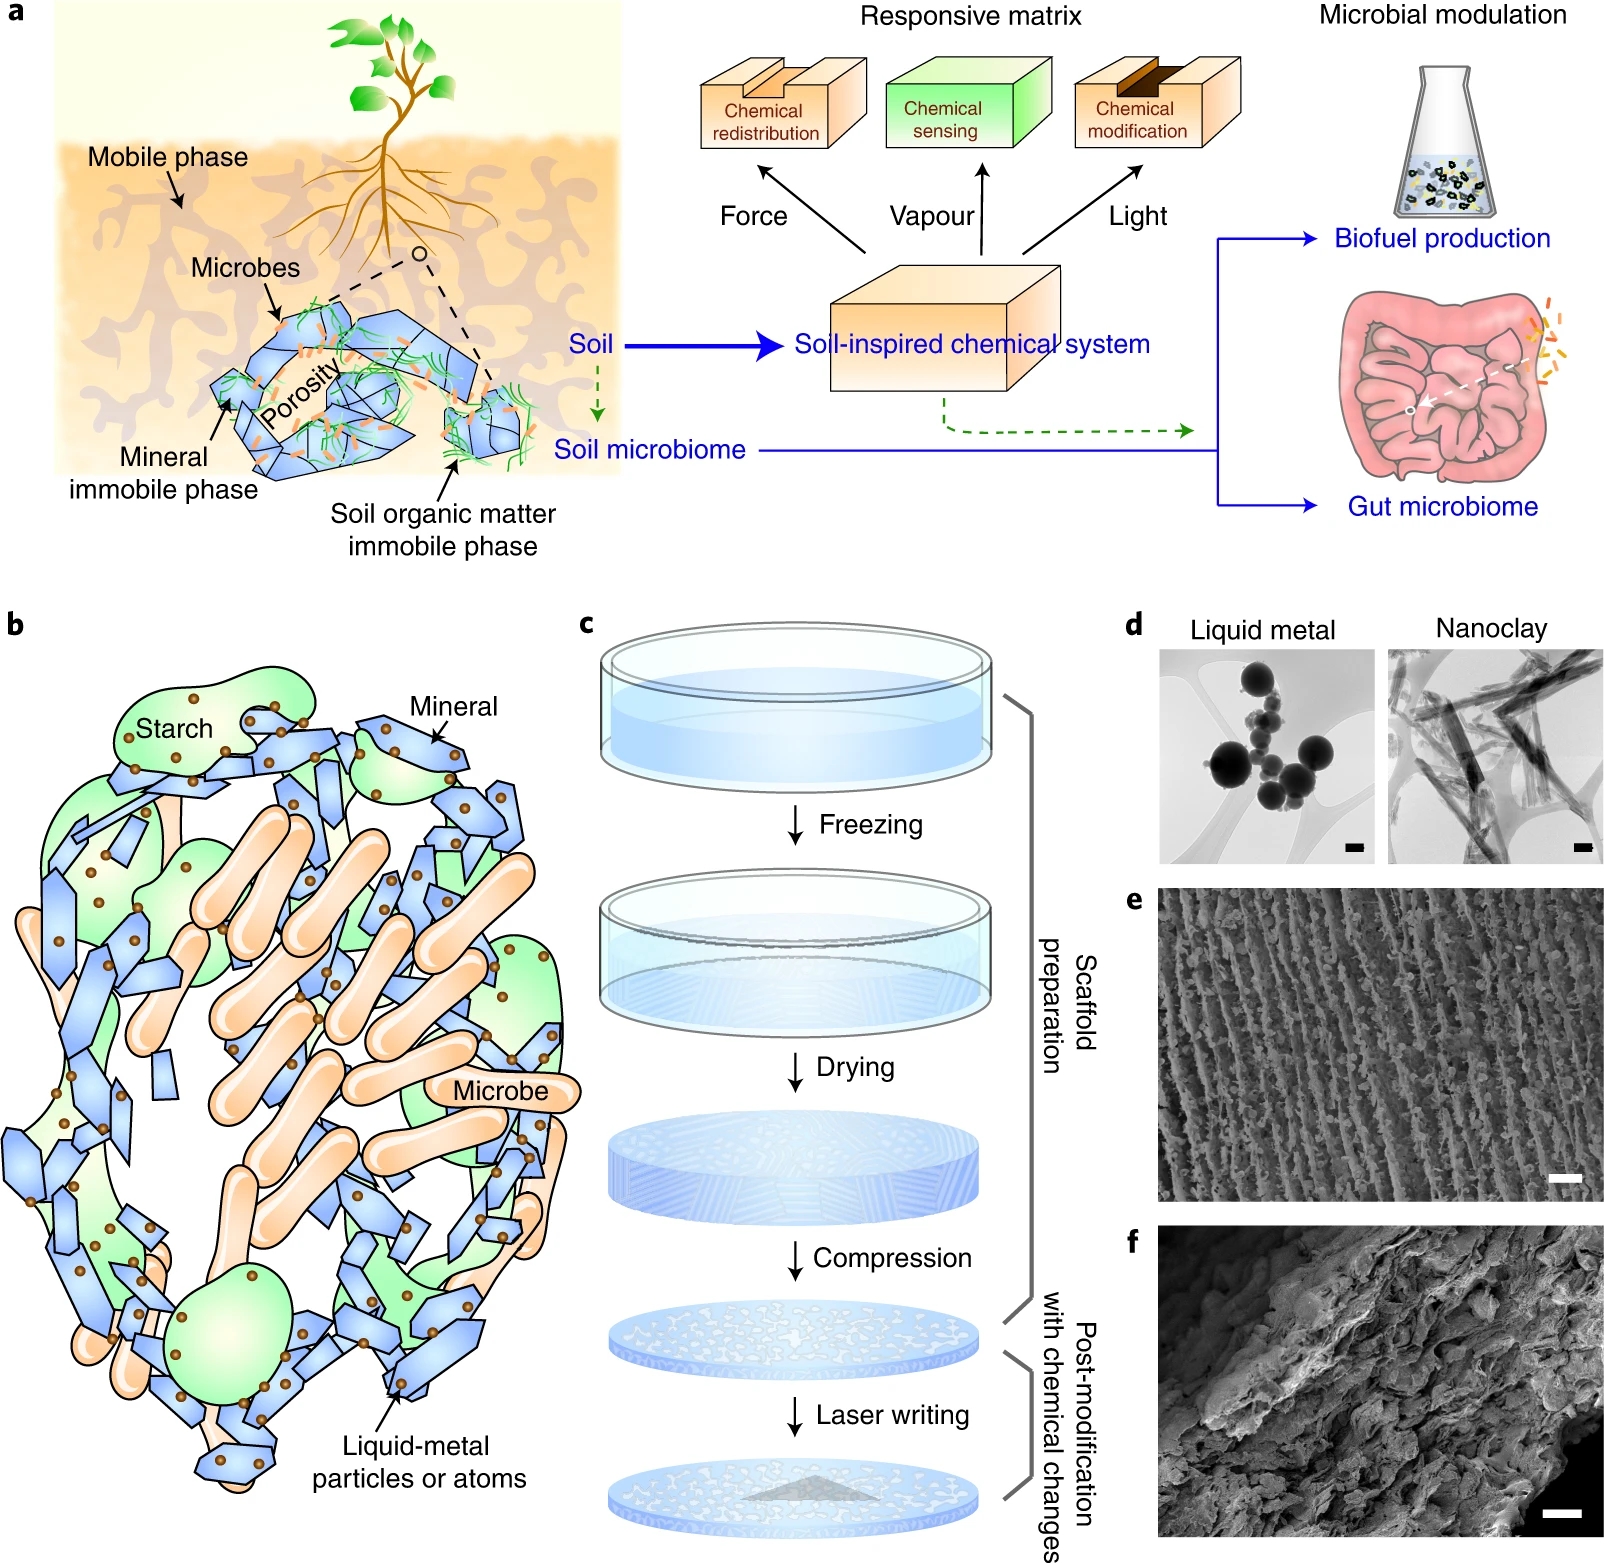 Soil-inspired dynamically responsive chemical system for microbial modulation